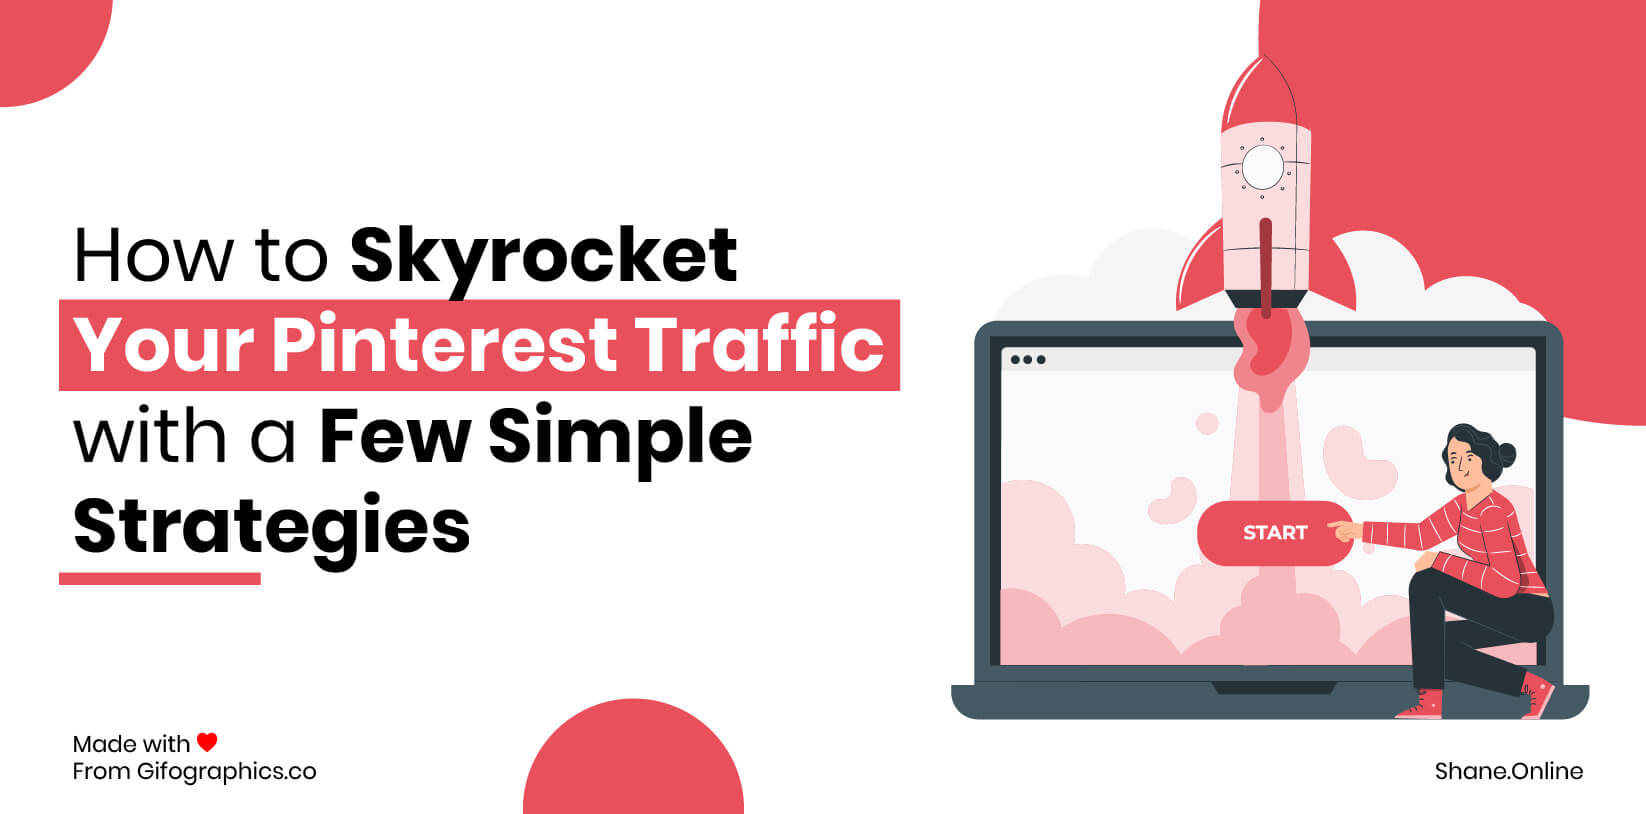 How to Skyrocket Your Pinterest Traffic with a Few Simple Strategies0